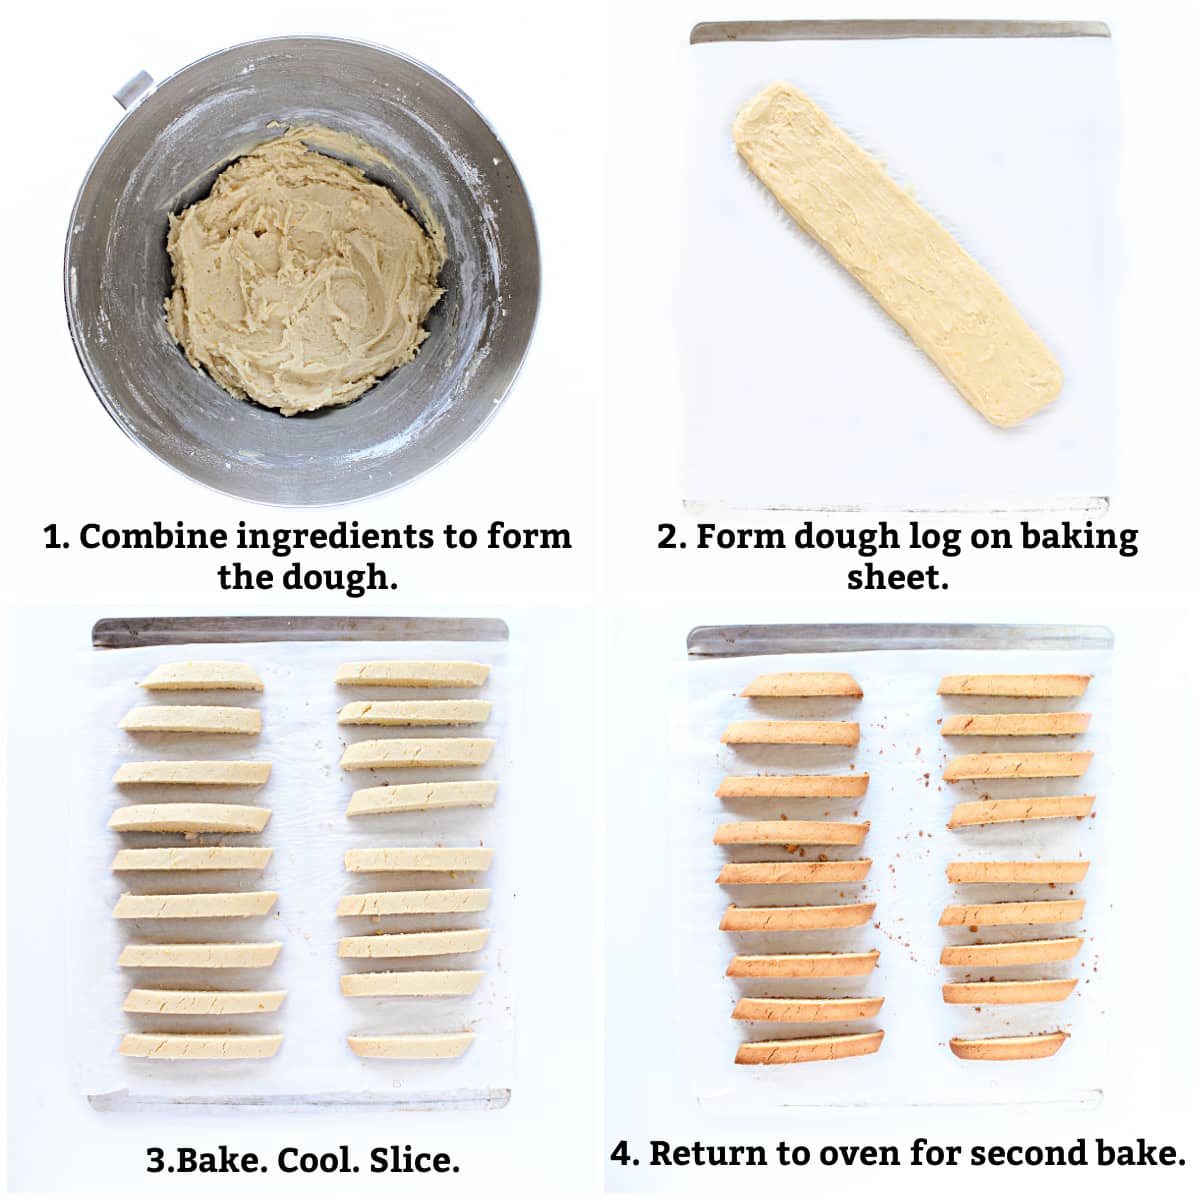 Biscotti cookie instructions: combine dough ingredients, form log on baking sheet, bake, cool, slice, bake again.